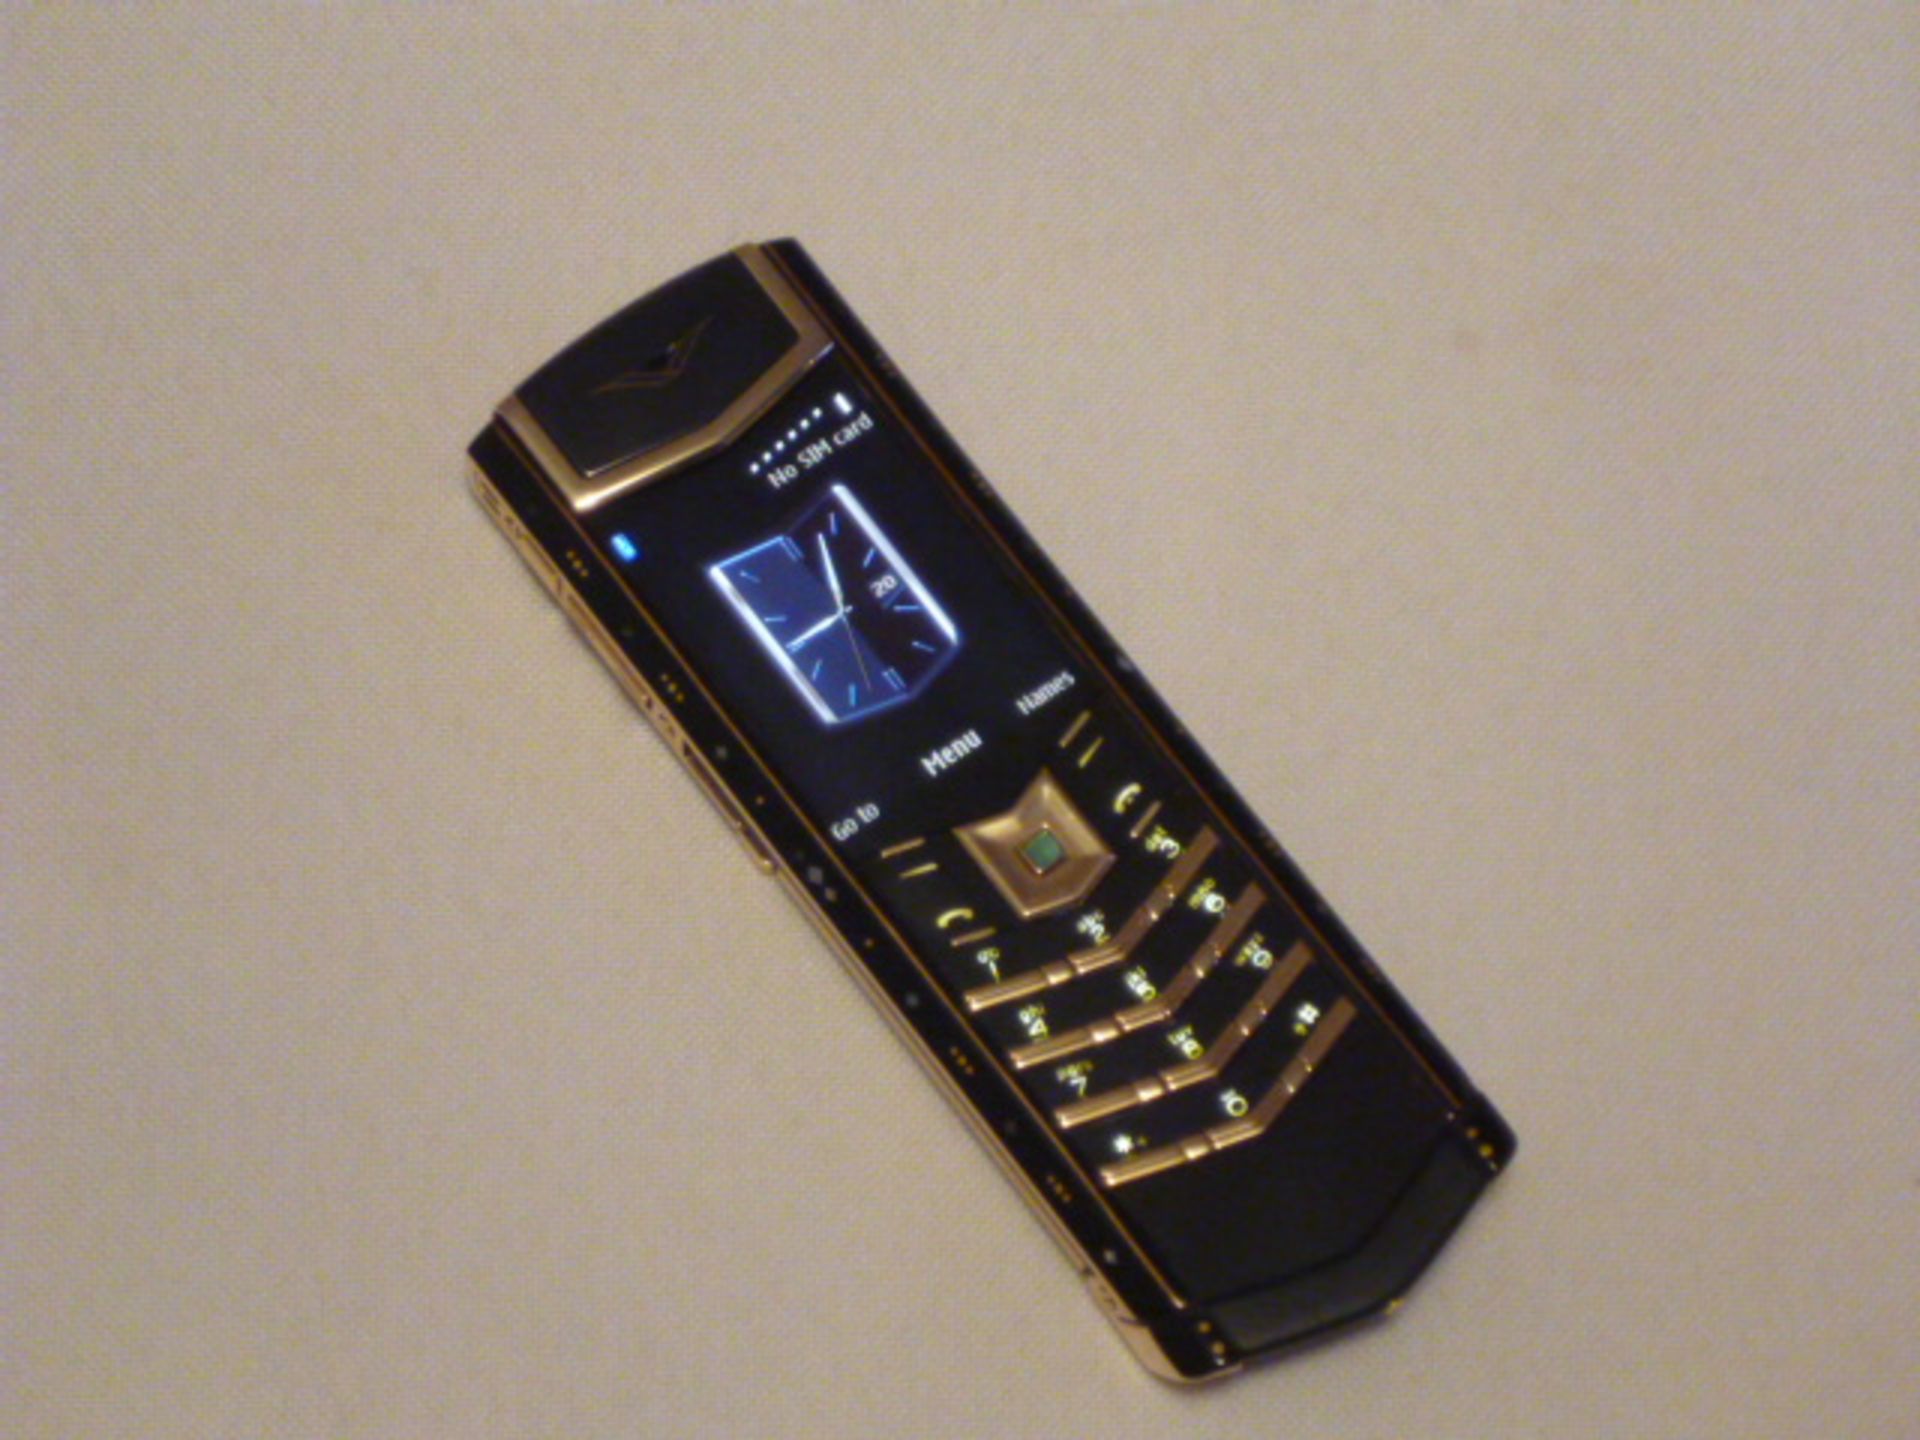 Vertu Signature Harmony Phone, Unique Design 4 of 4. This Handset has been Designed and Created - Image 6 of 8